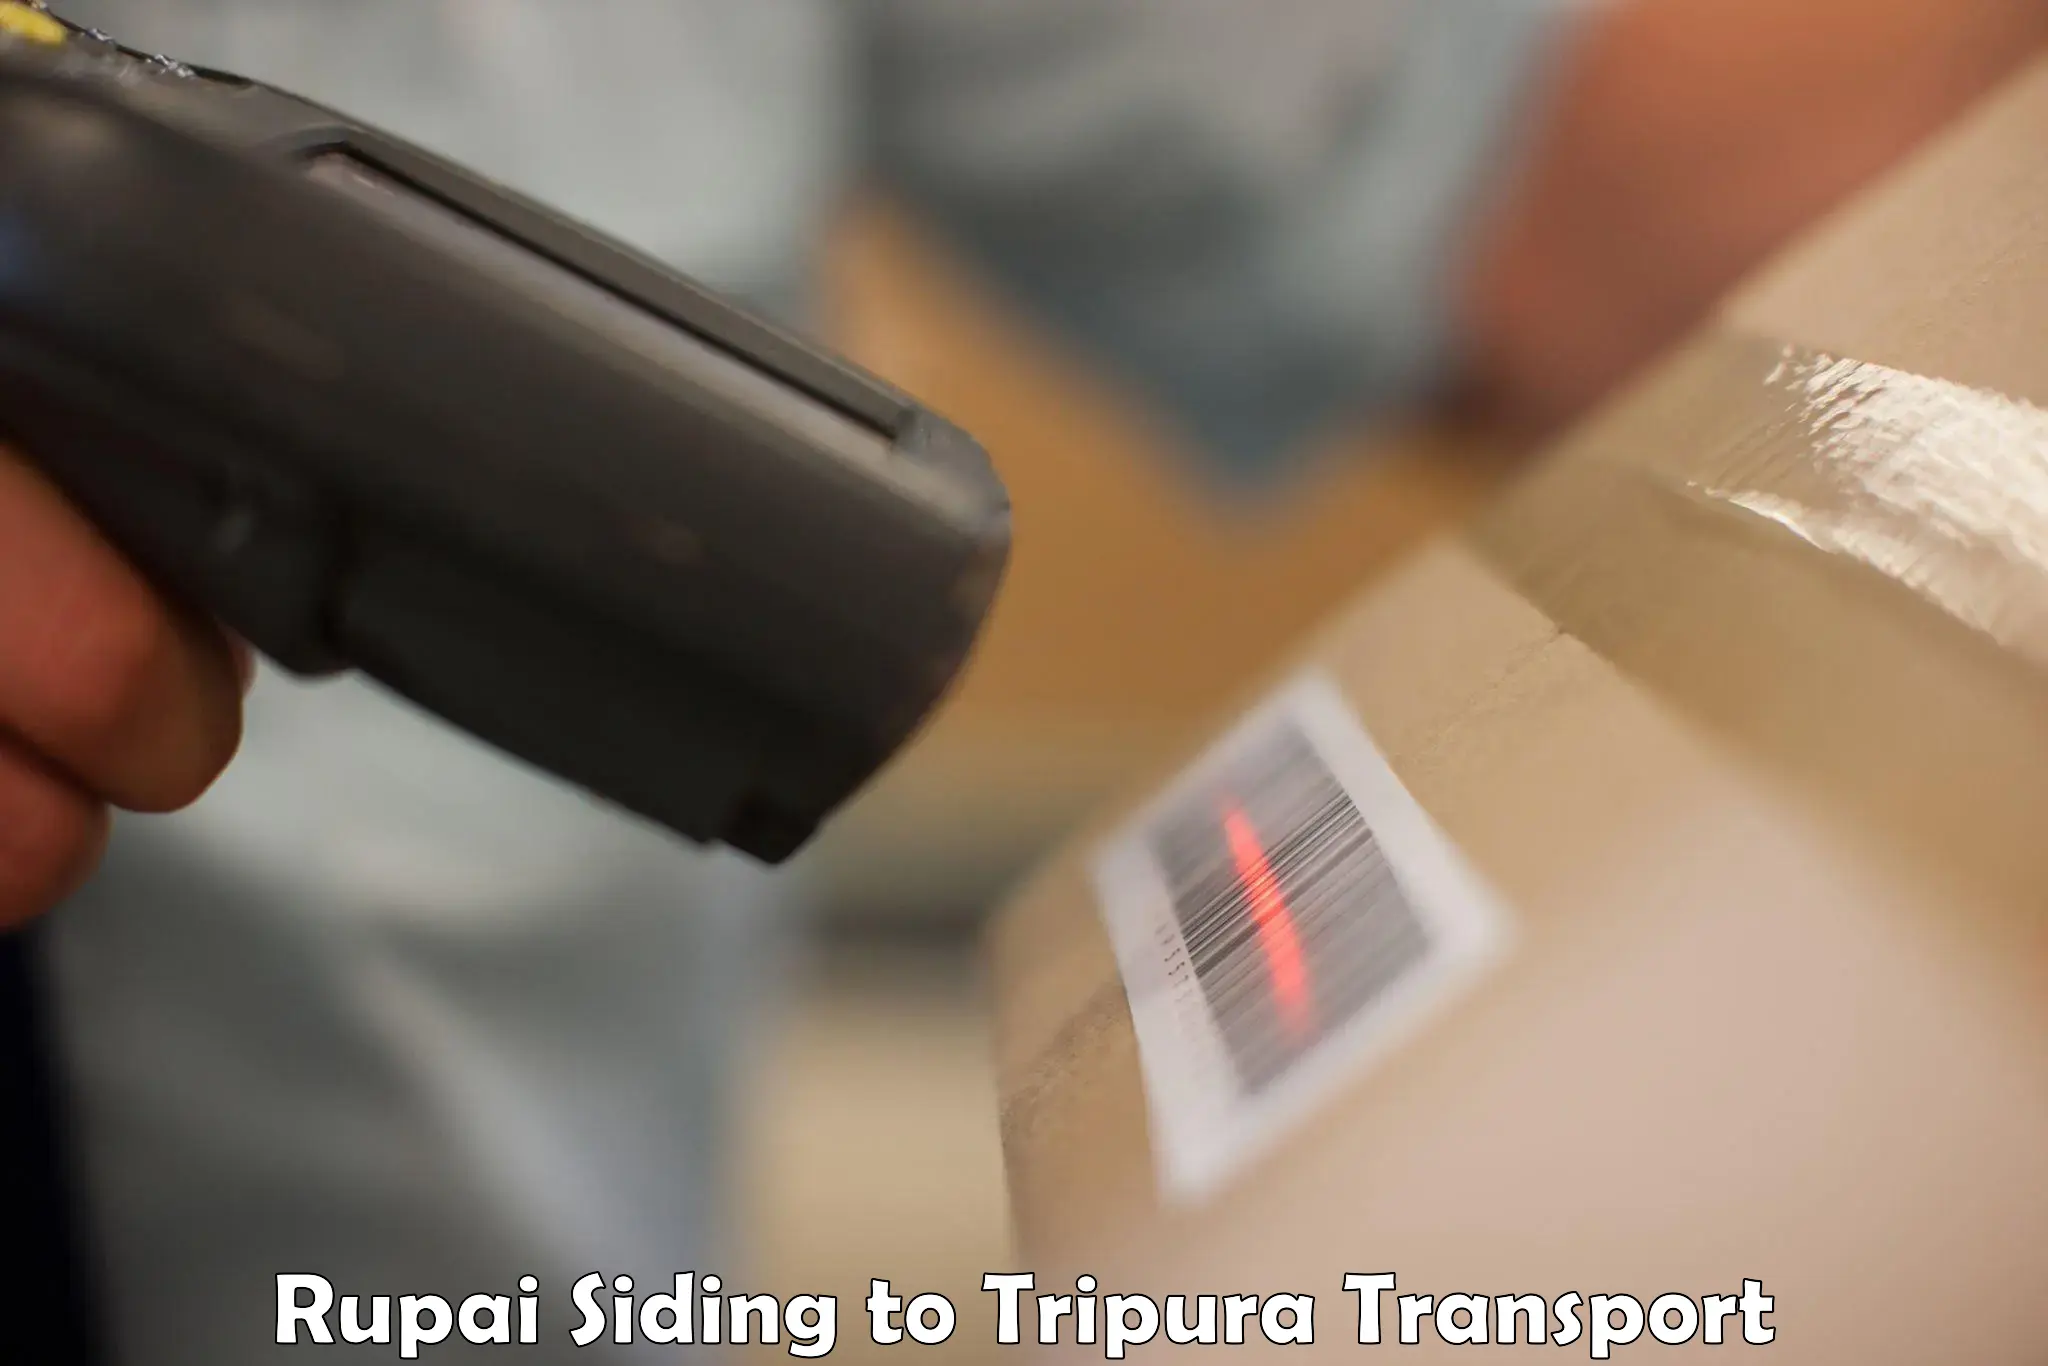 Air freight transport services in Rupai Siding to South Tripura